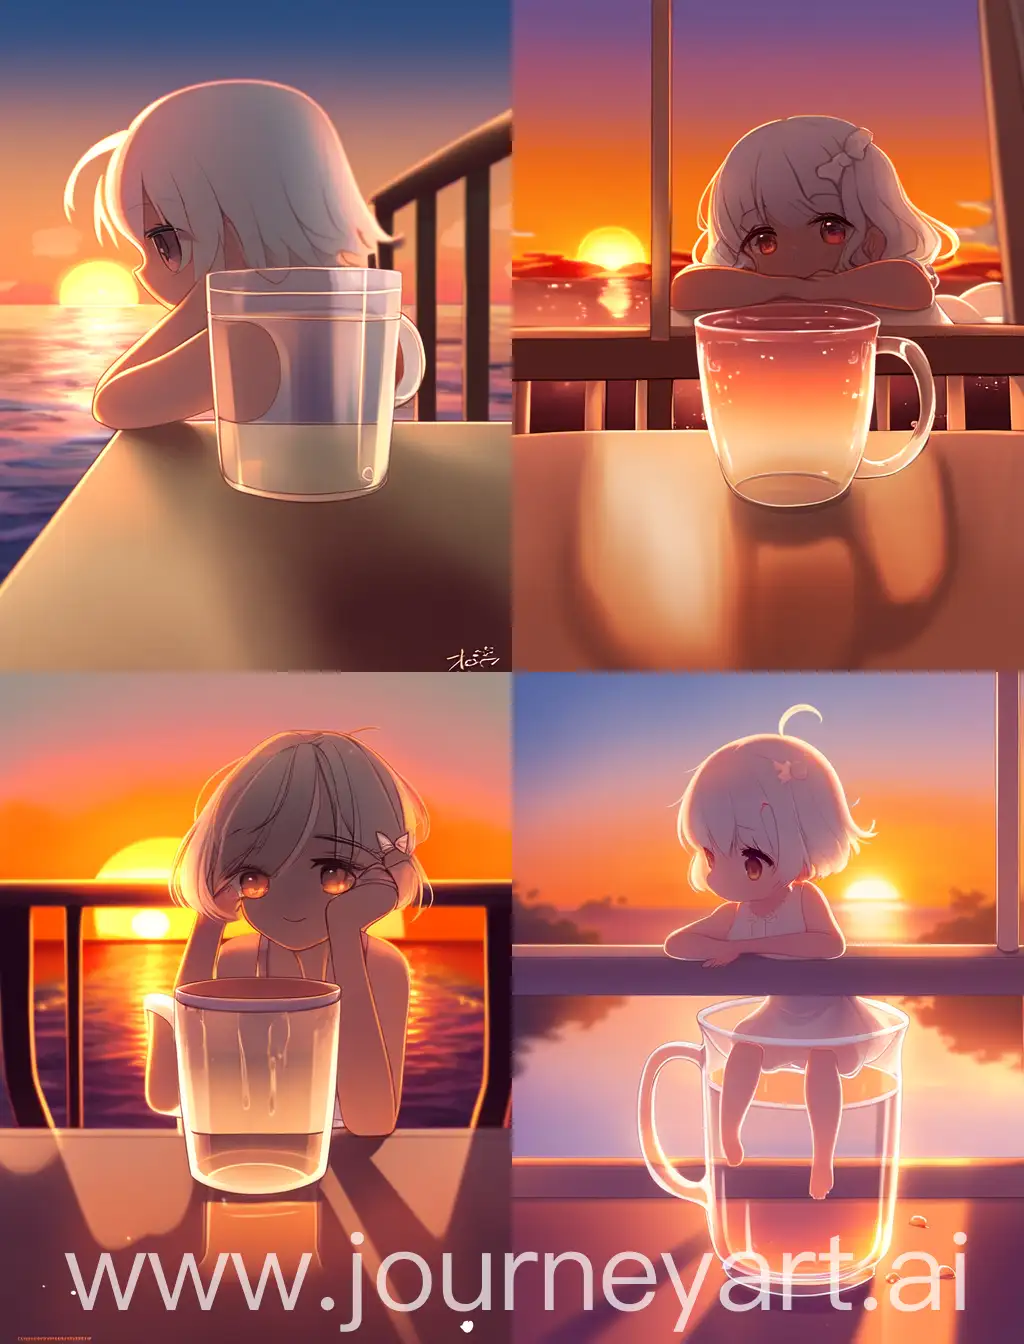 cute girl, white hair, bathing suit, sitting in a mug with her back to the viewer, in a glass mug, on a table, sunset